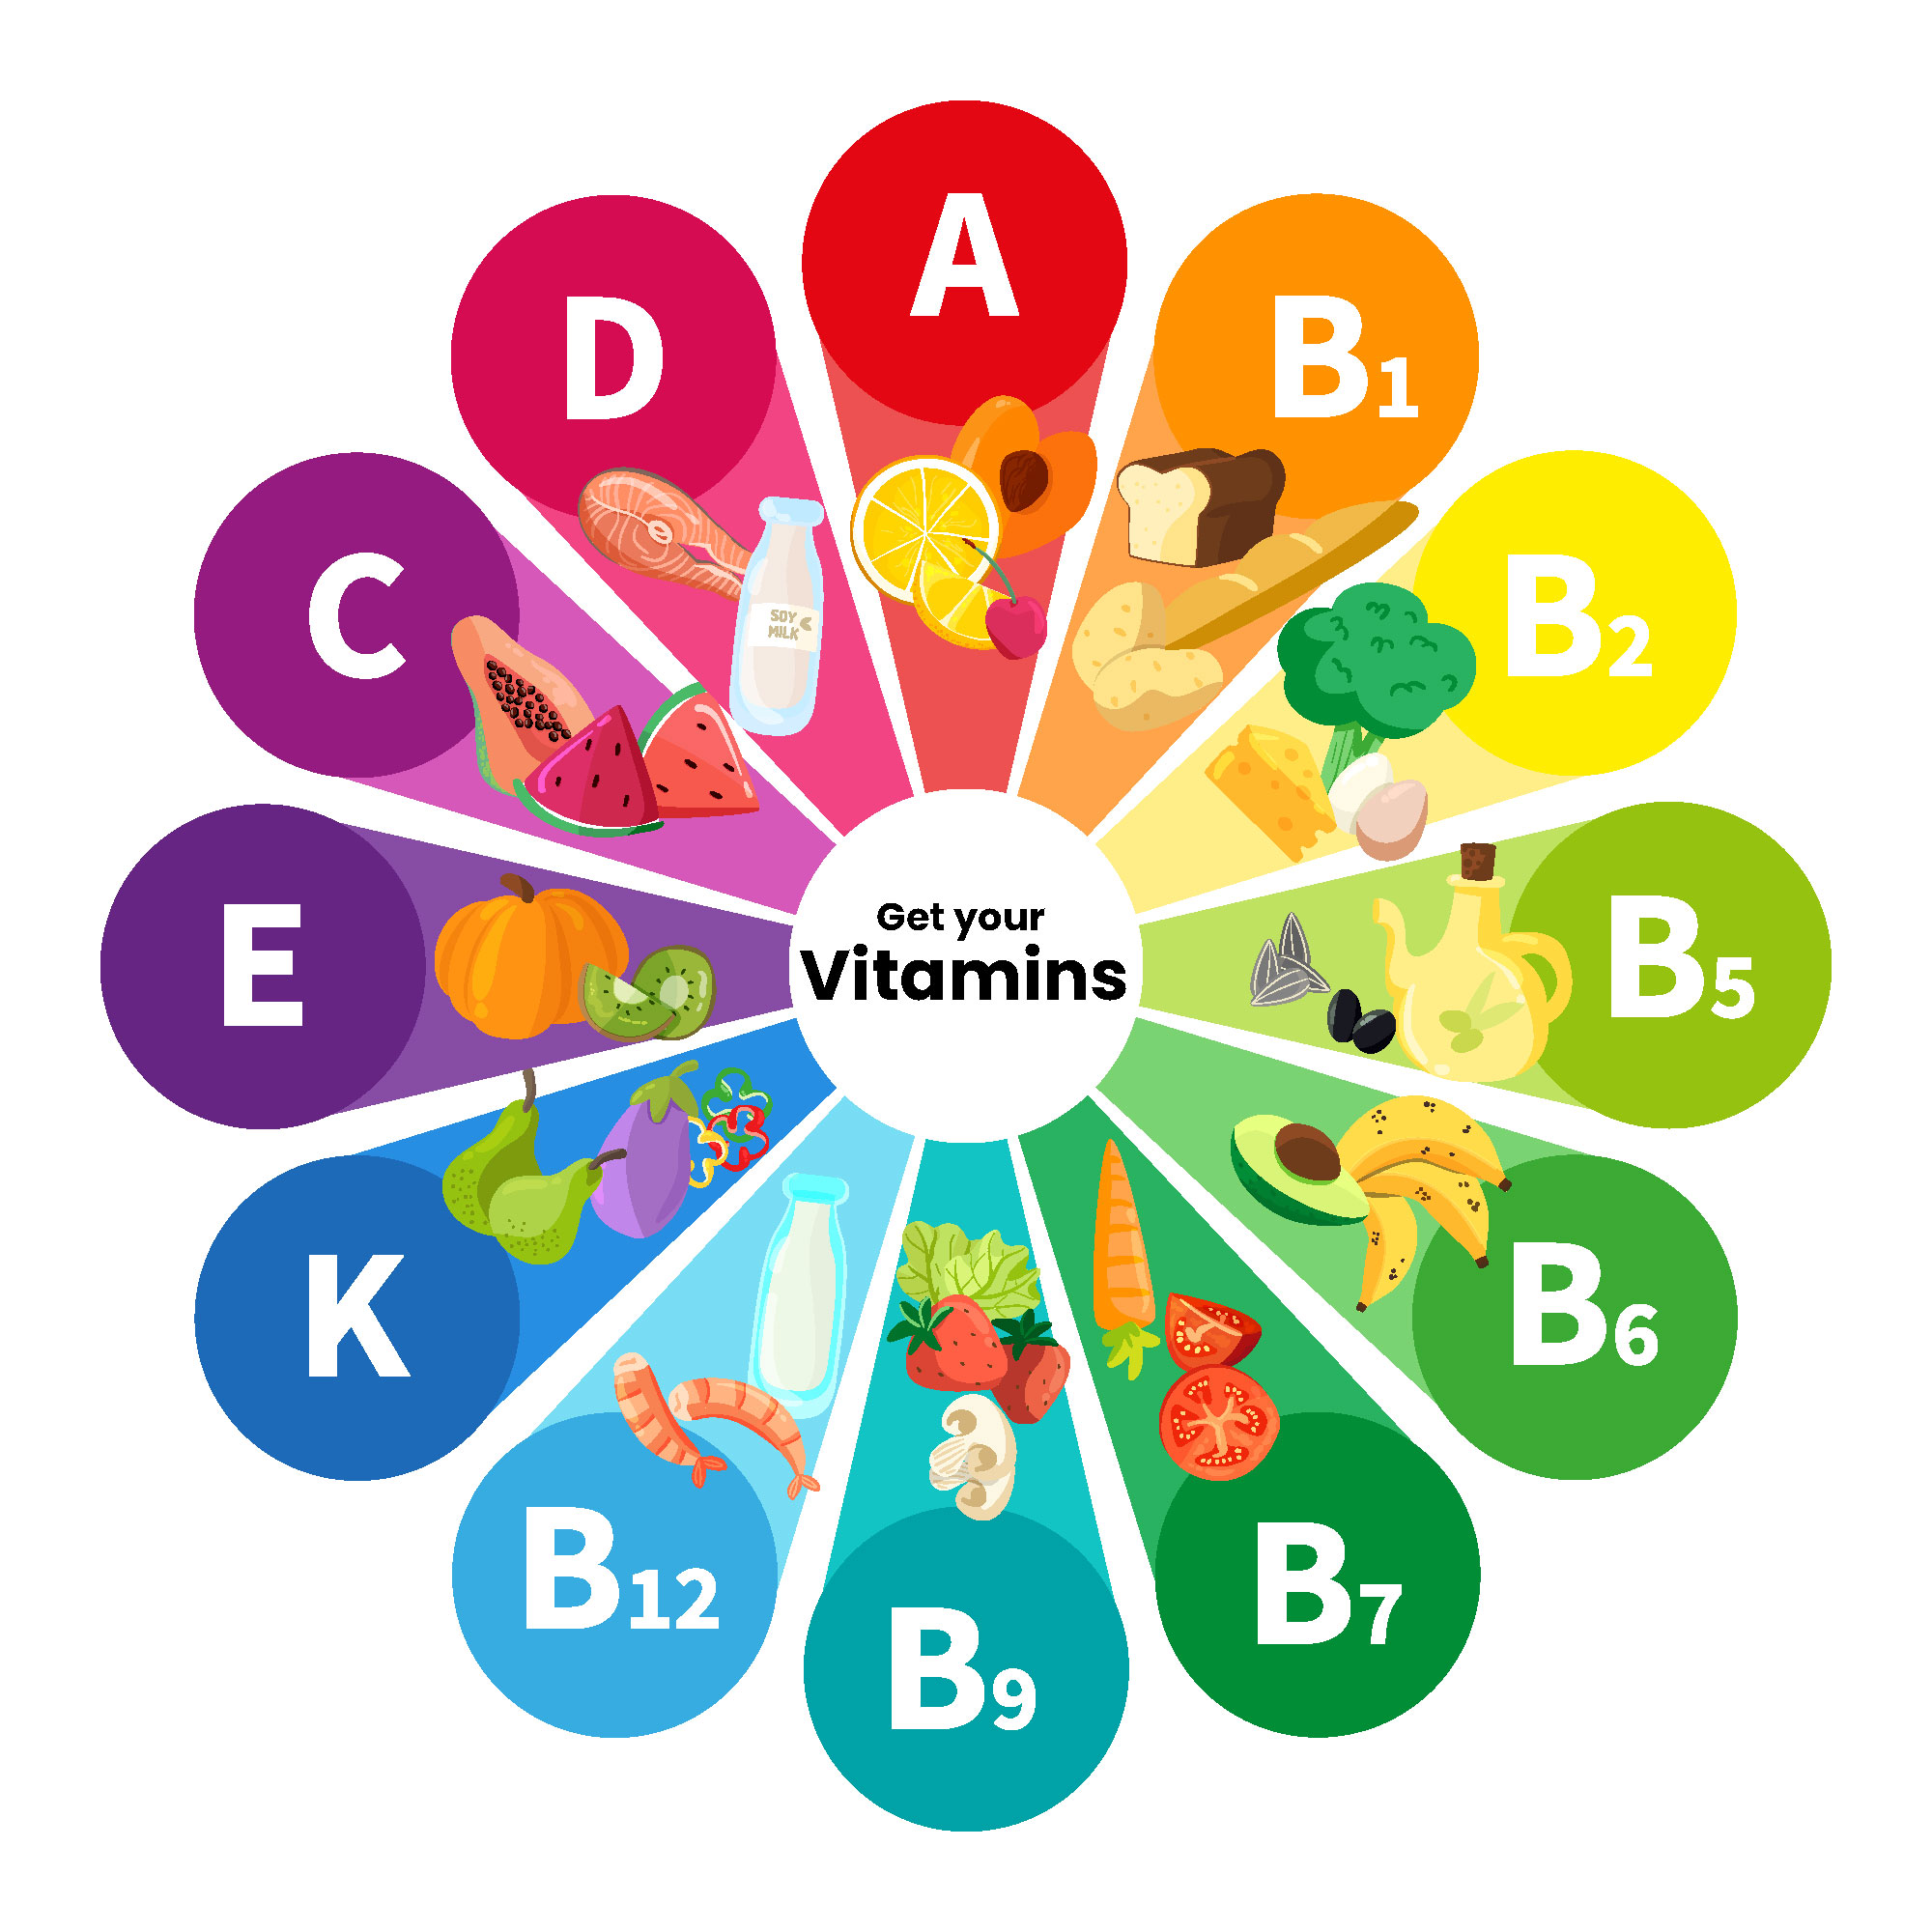 All the vitamins that you need 